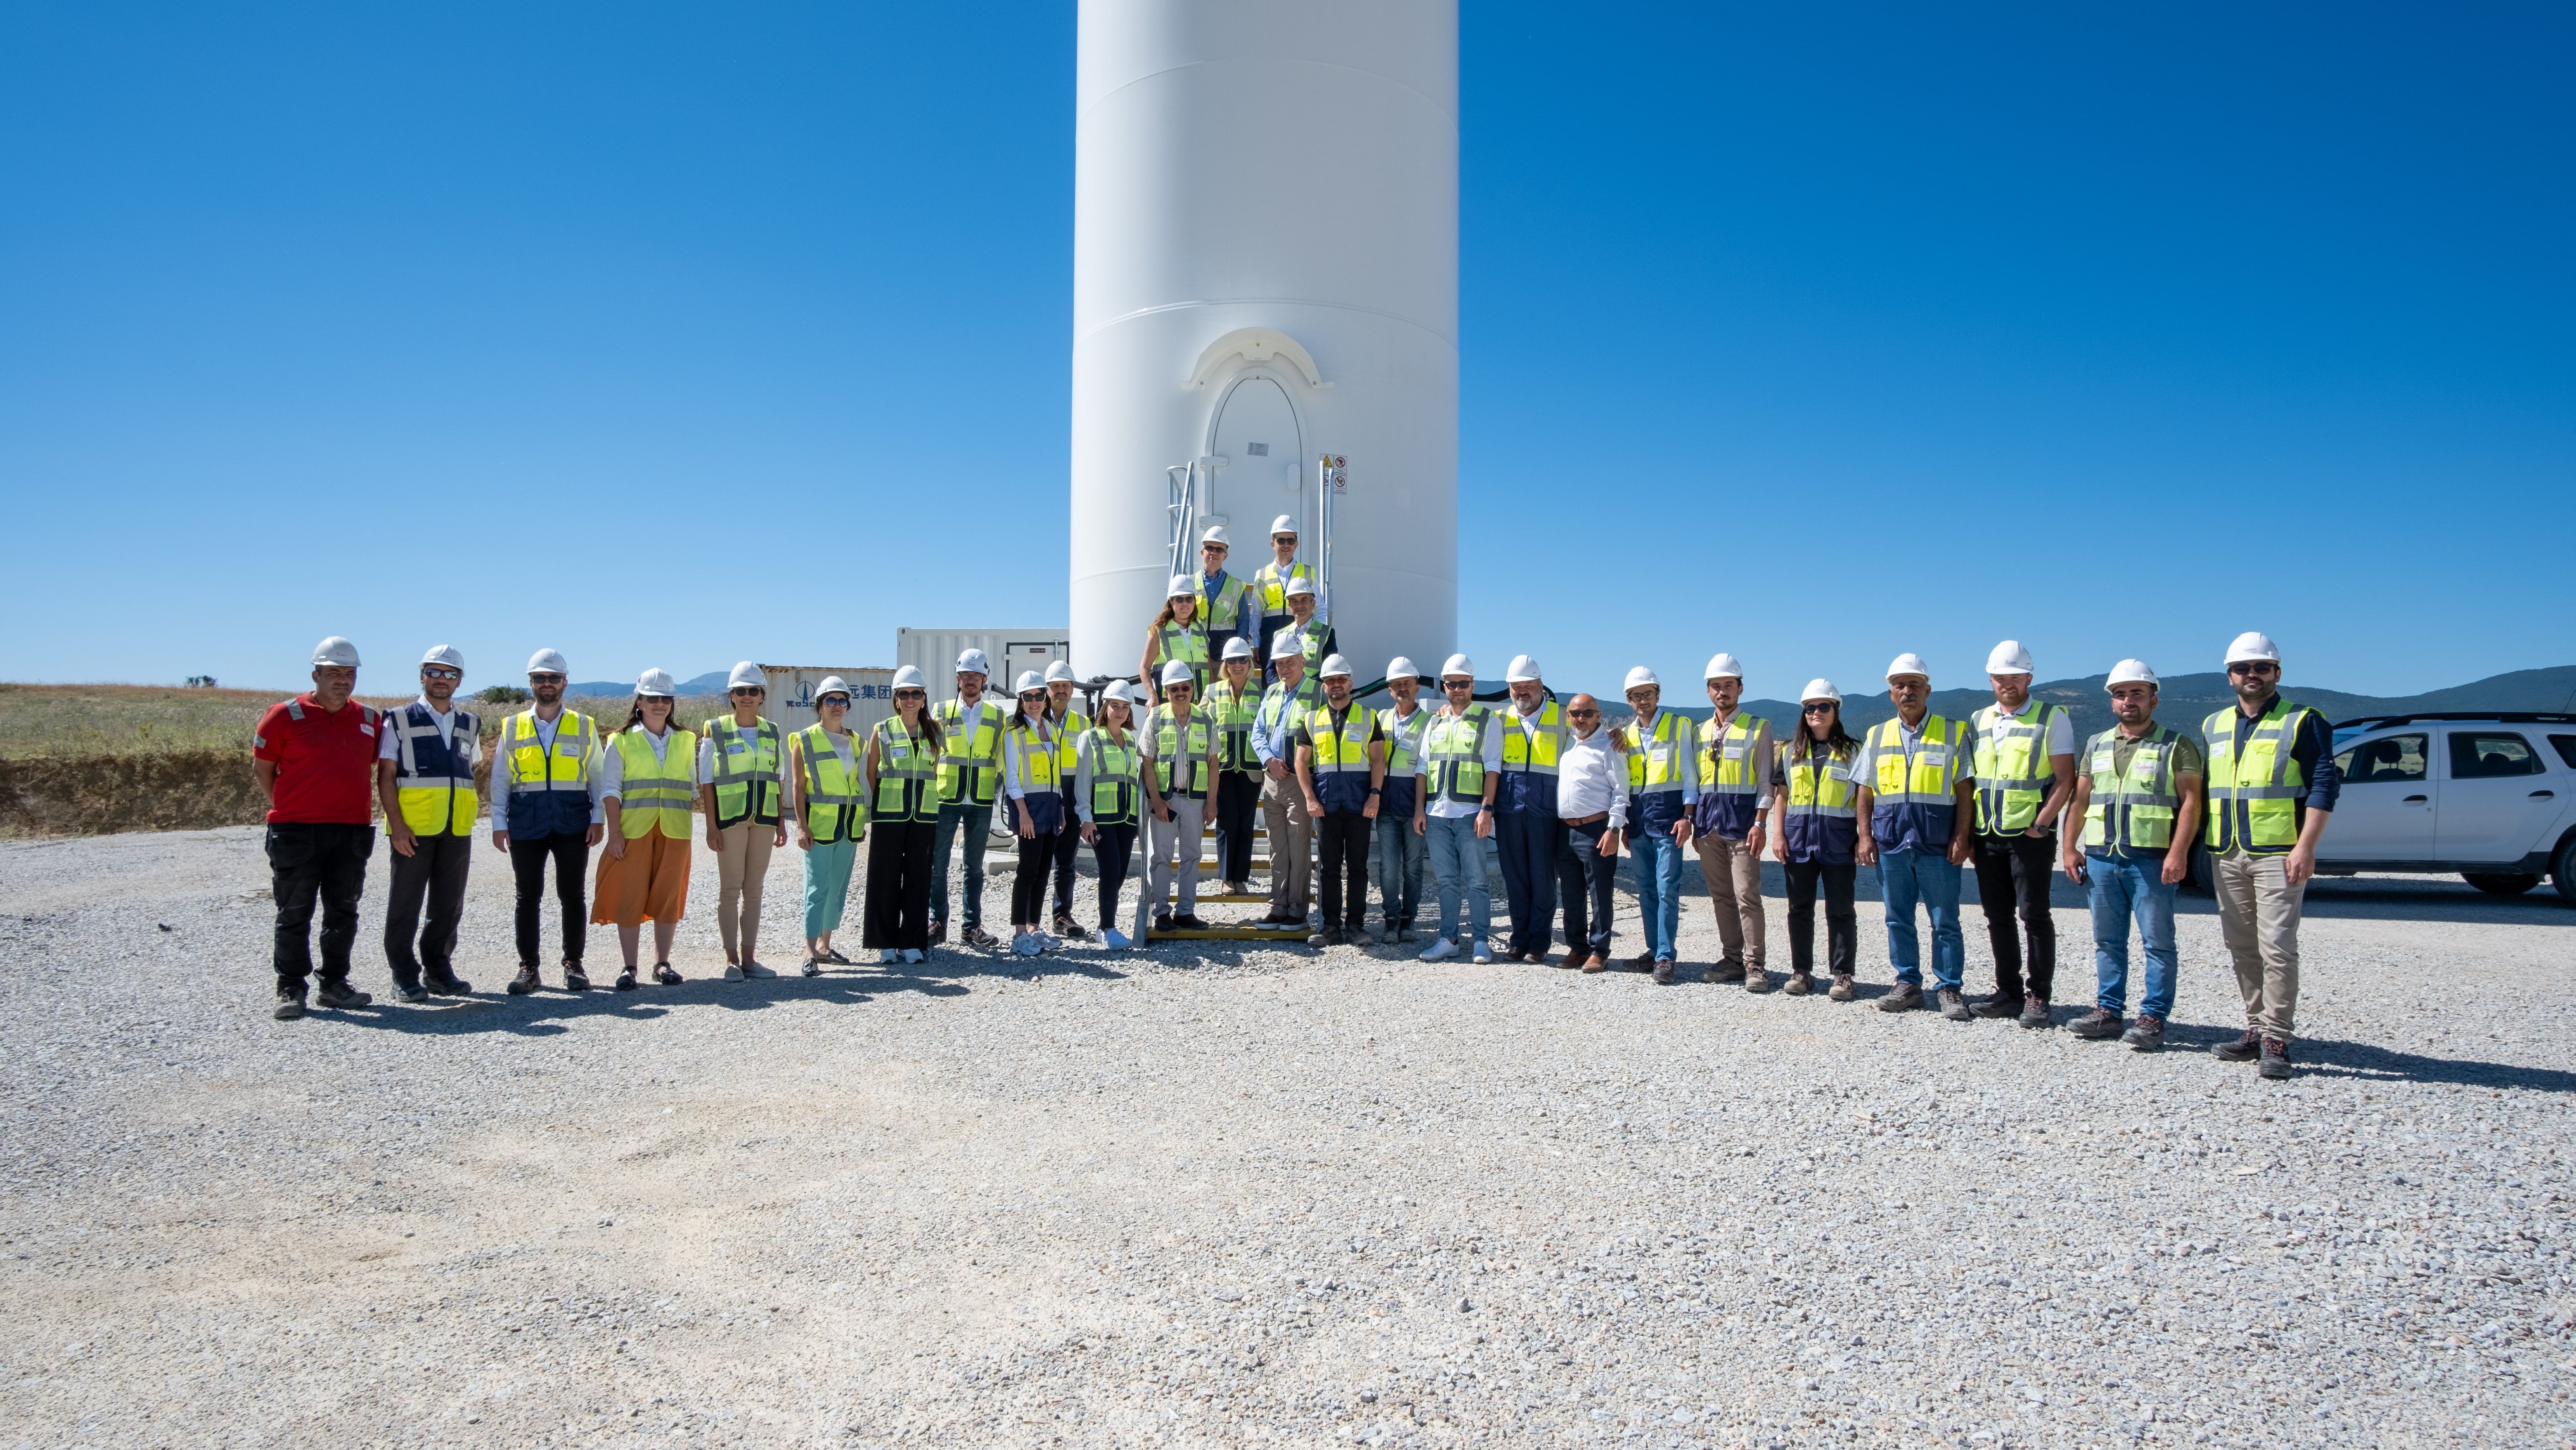 Visit to Türkiye's Largest Hybrid Solar Power Plant by Our Board Members